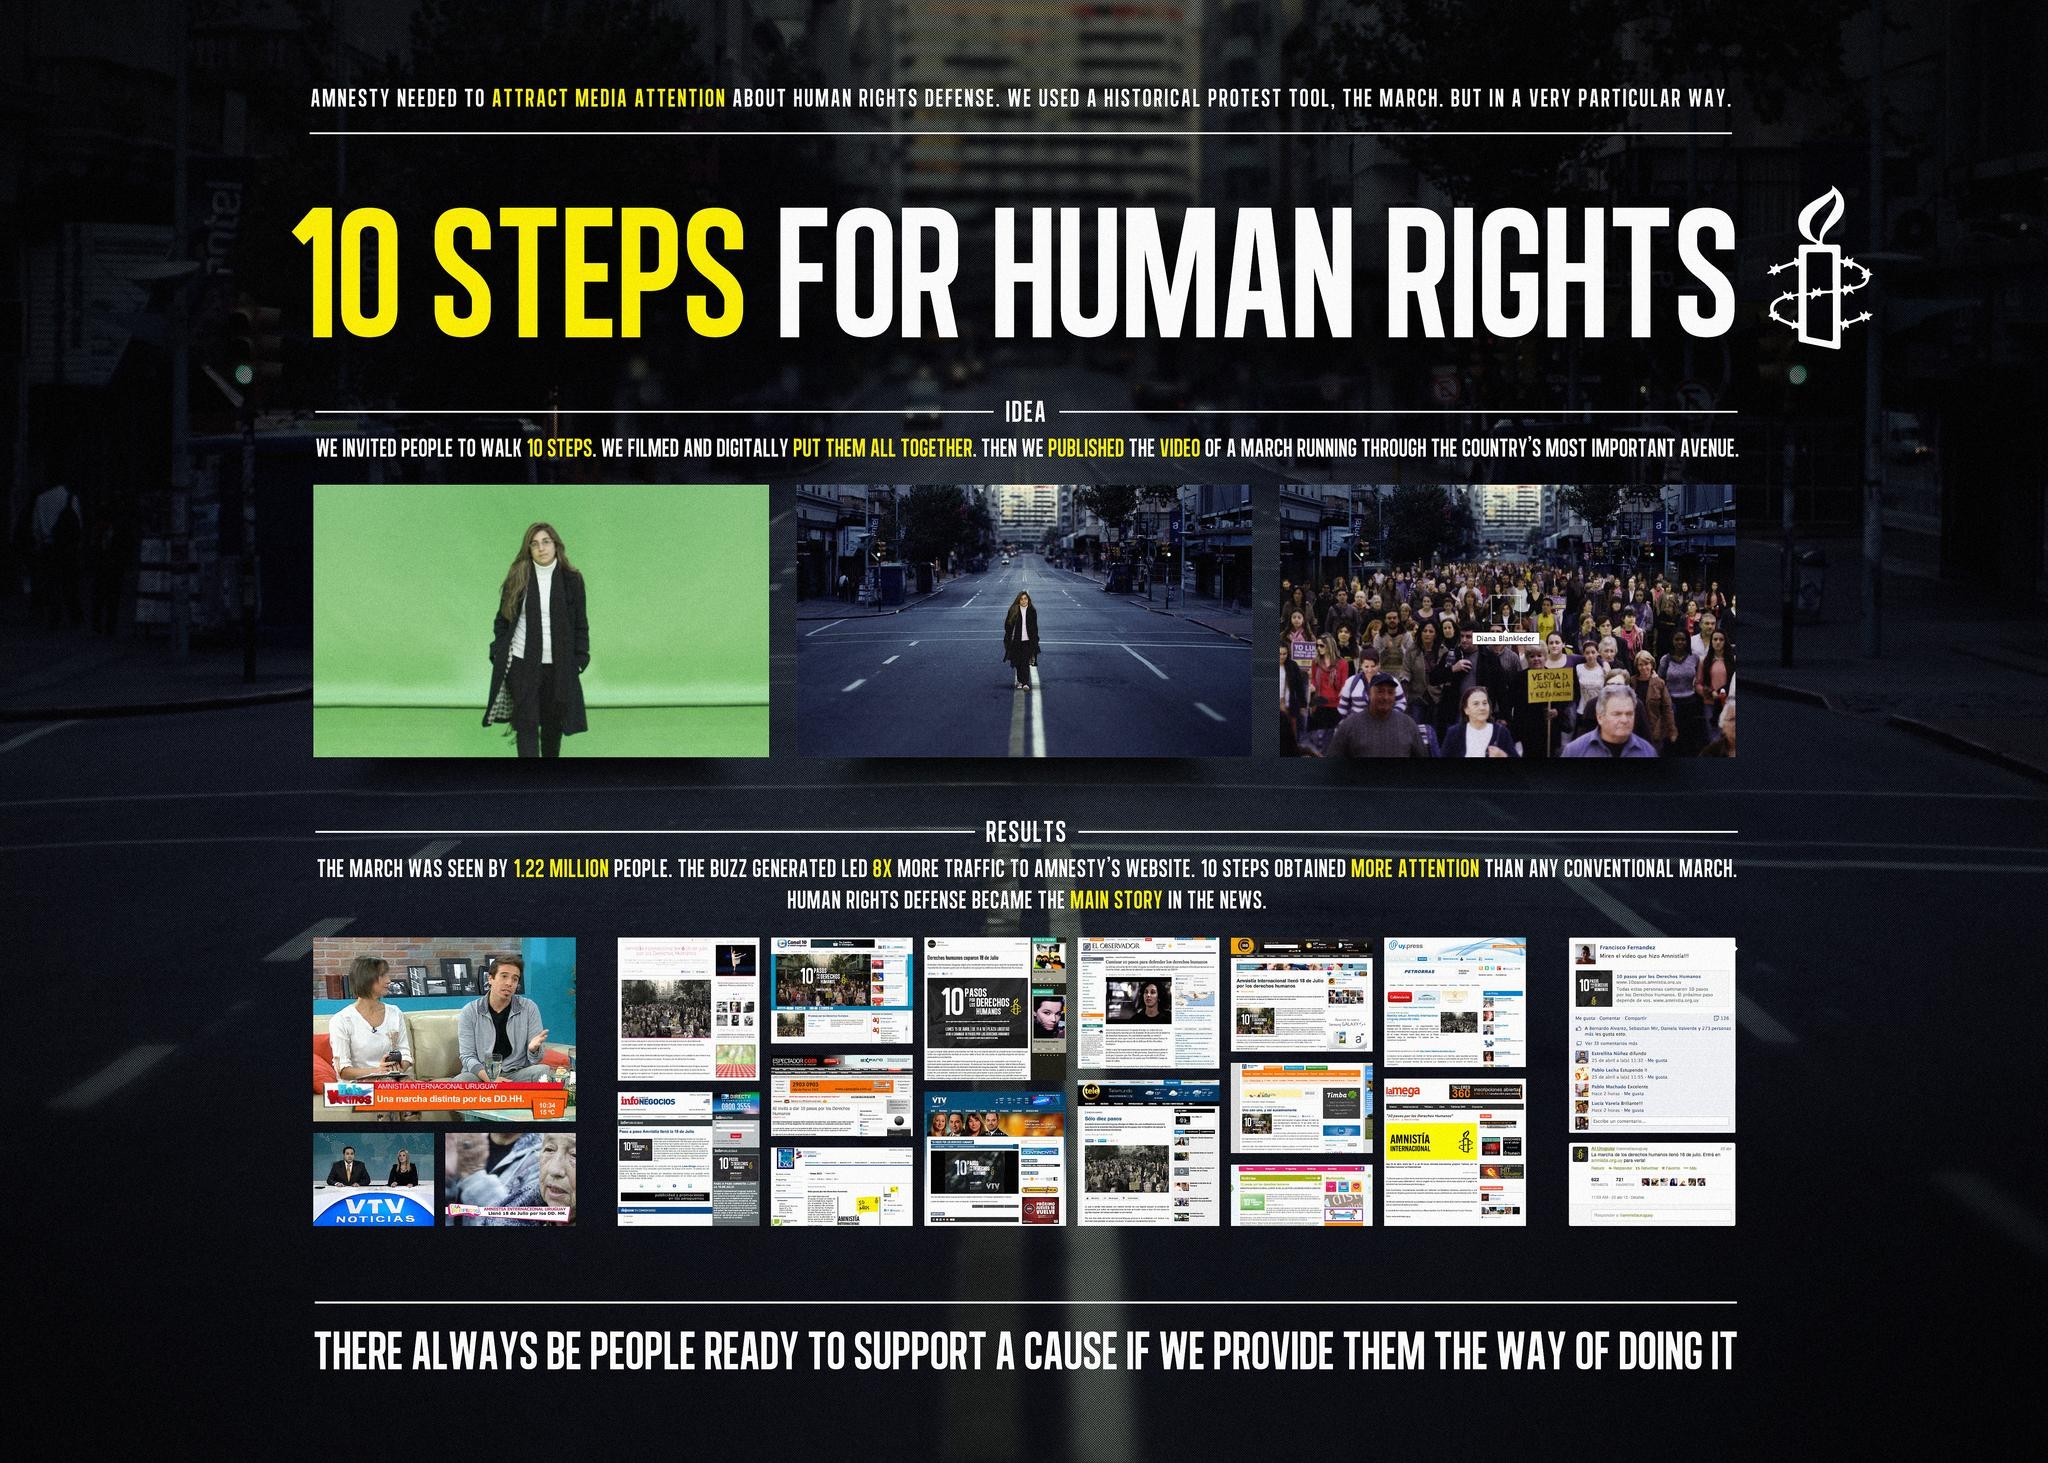 10 STEPS FOR HUMAN RIGHTS